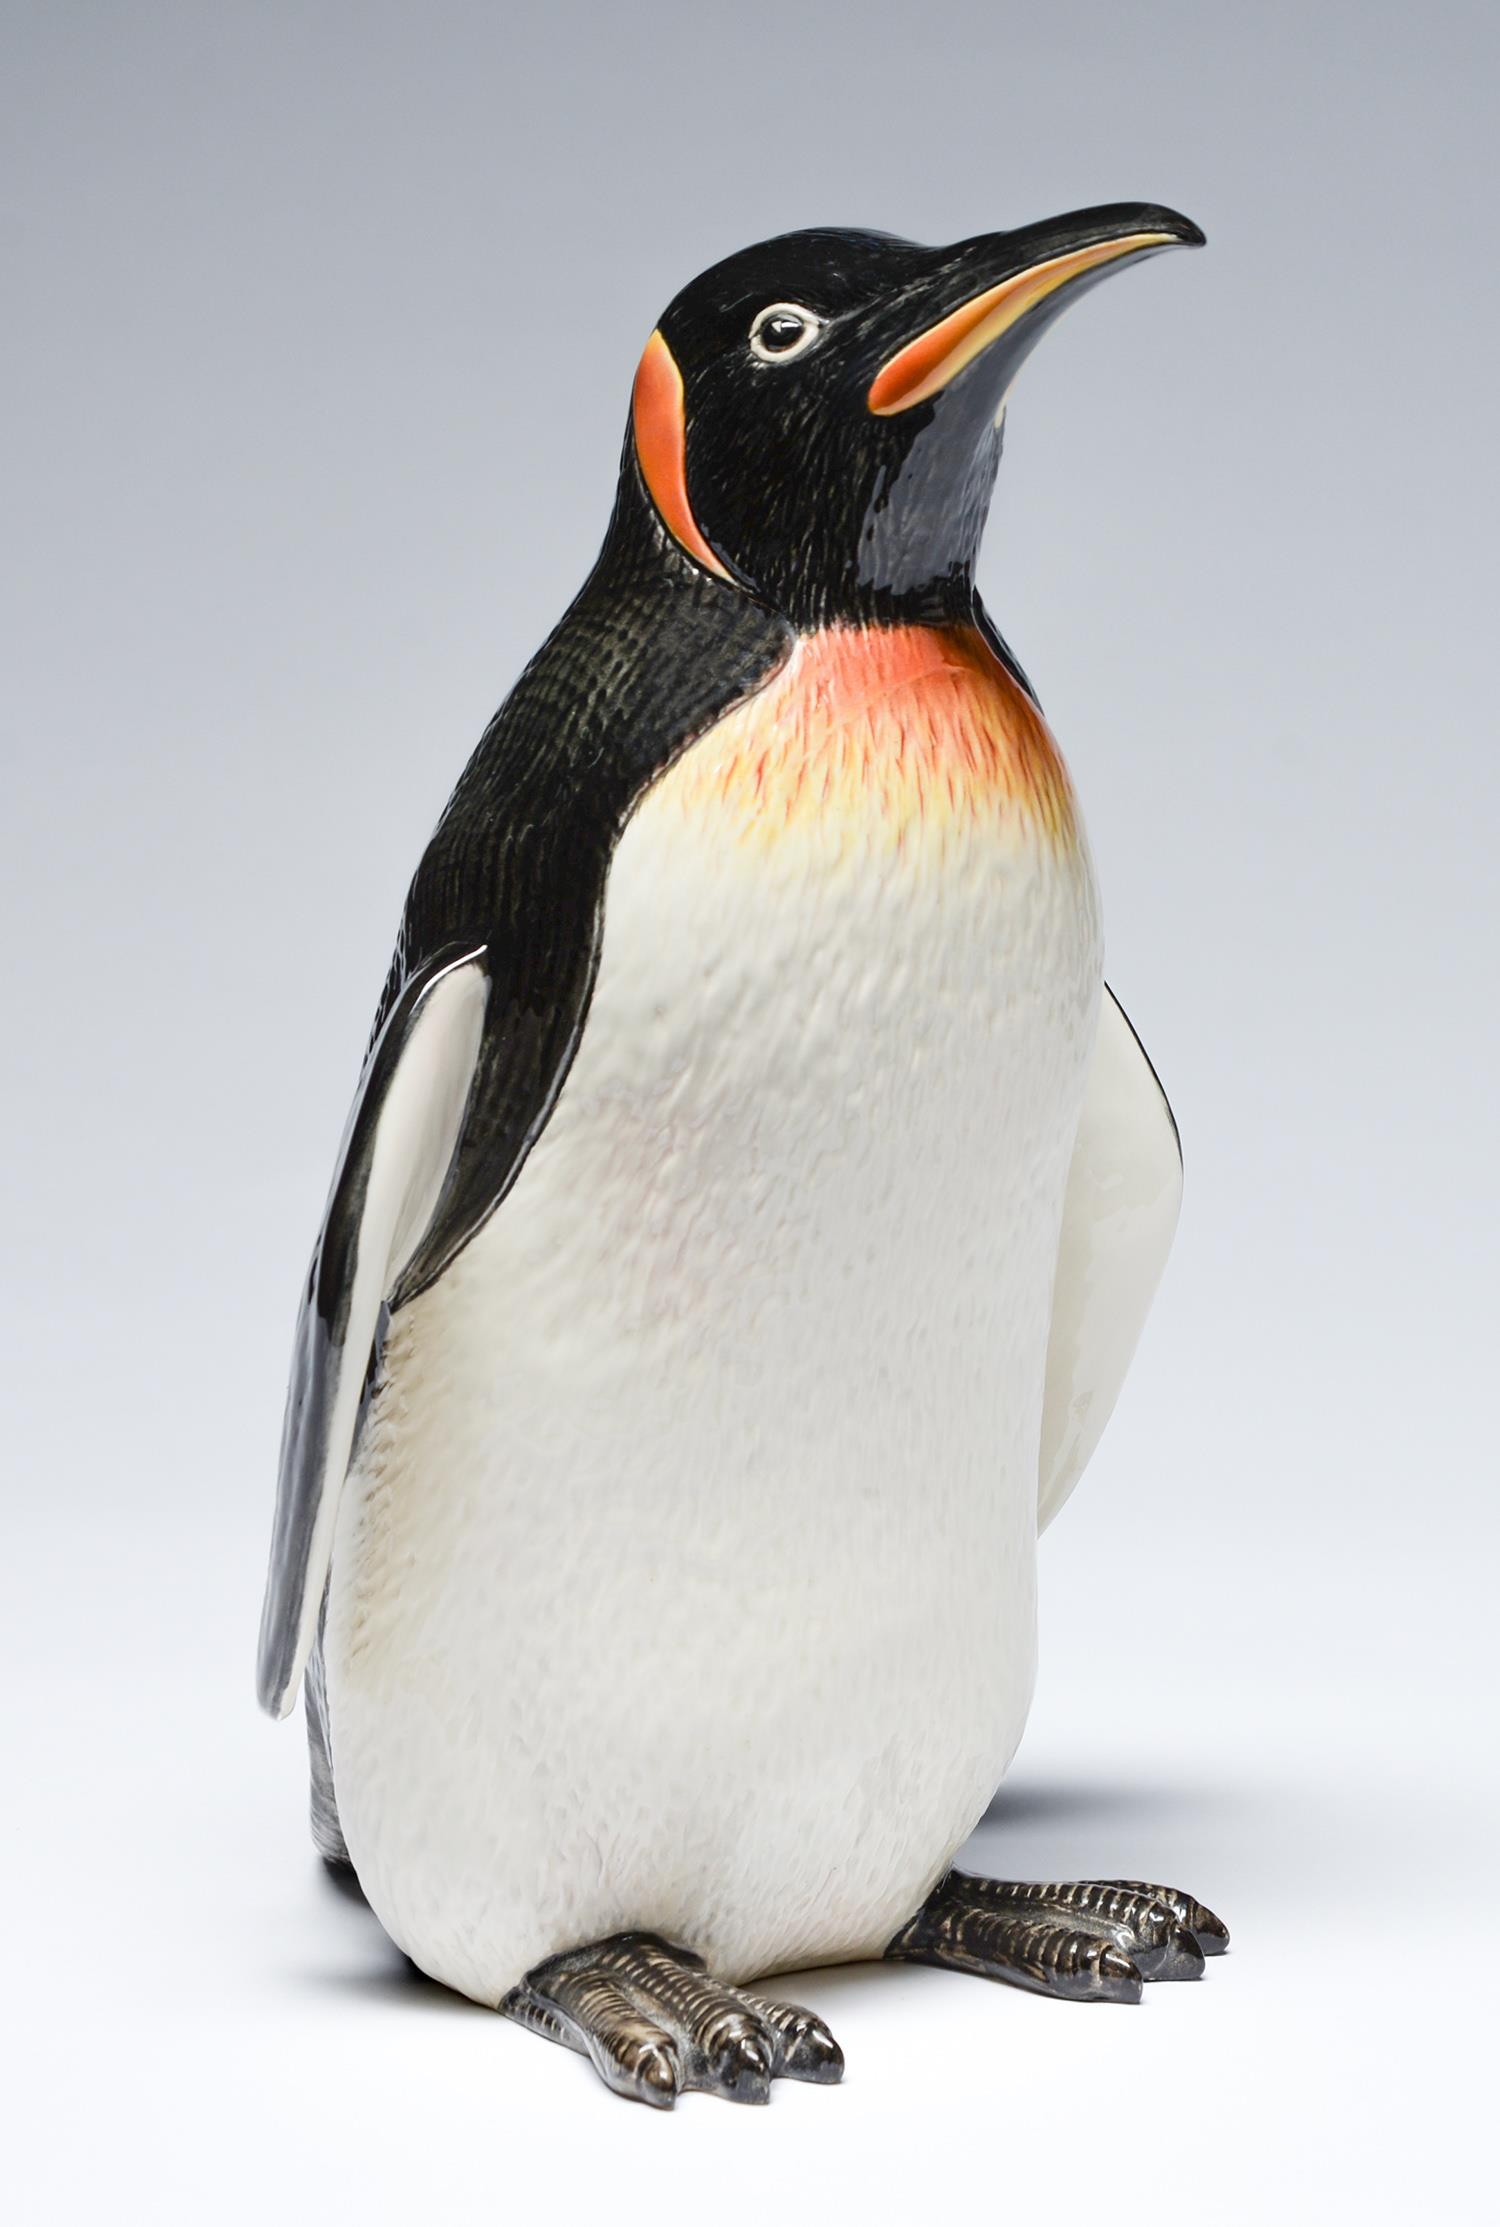 A Beswick model of a penguin, 30cm h, impressed mark and shape No 2357 ConditionGood condition